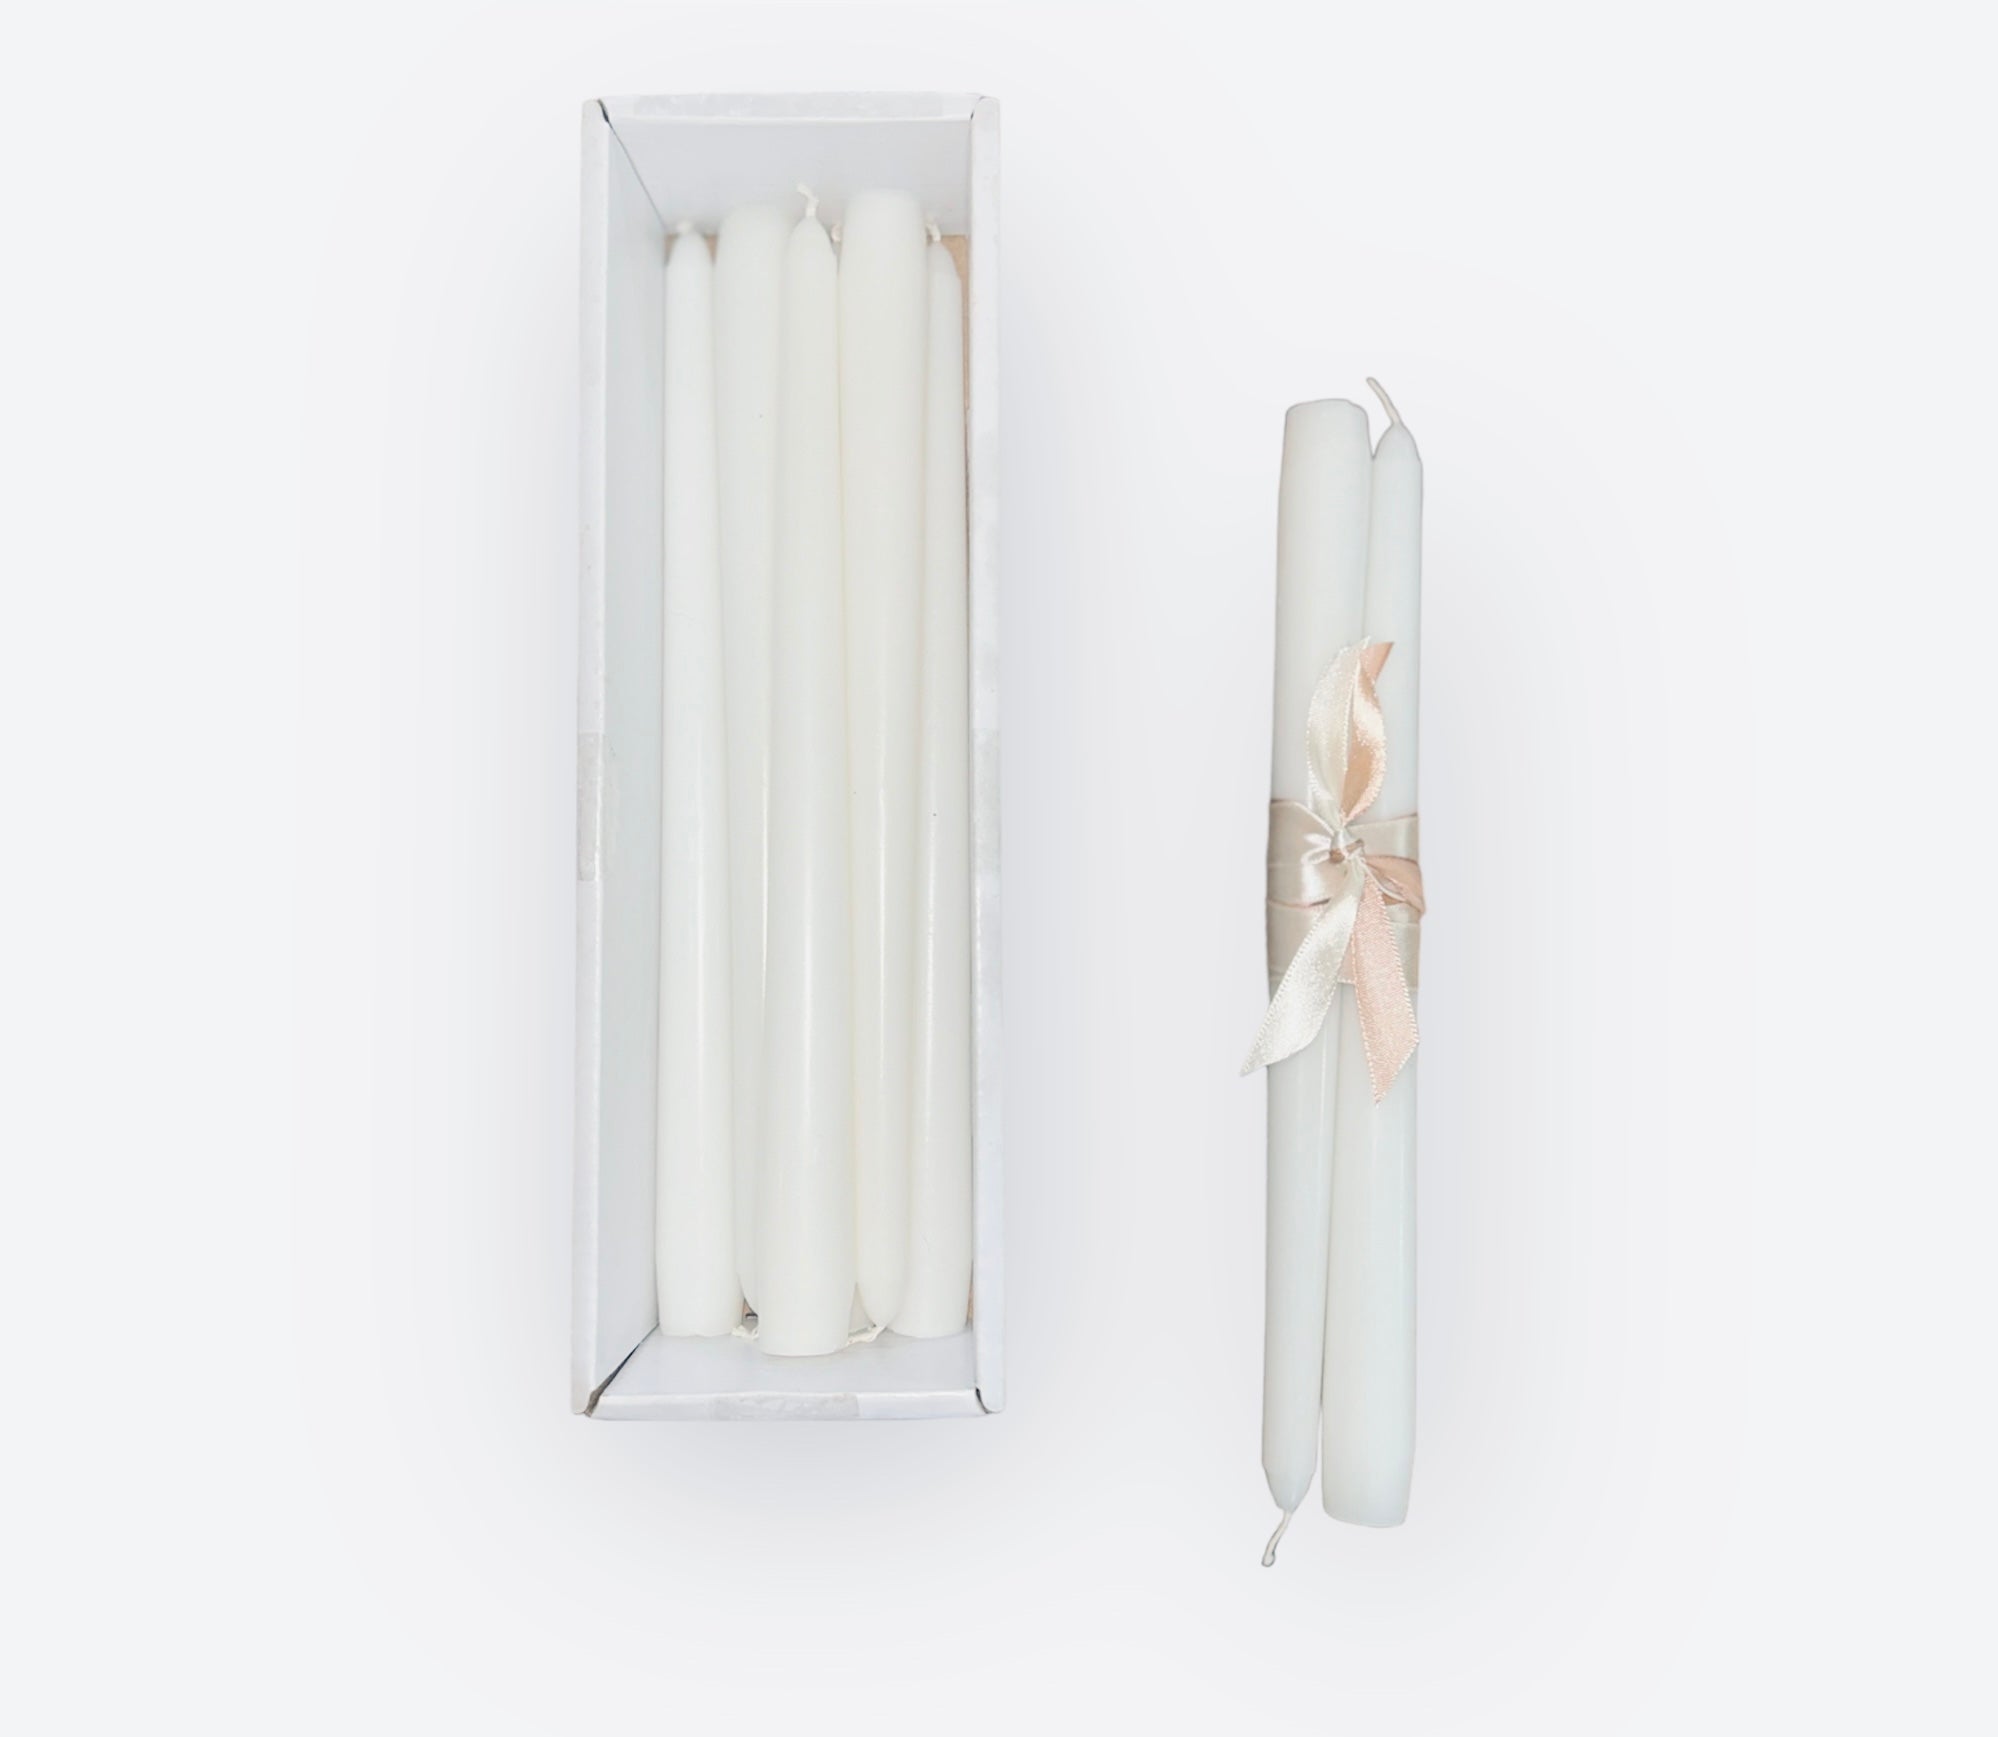 Pair of 2 Unscented Taper Candles, Shine Finish